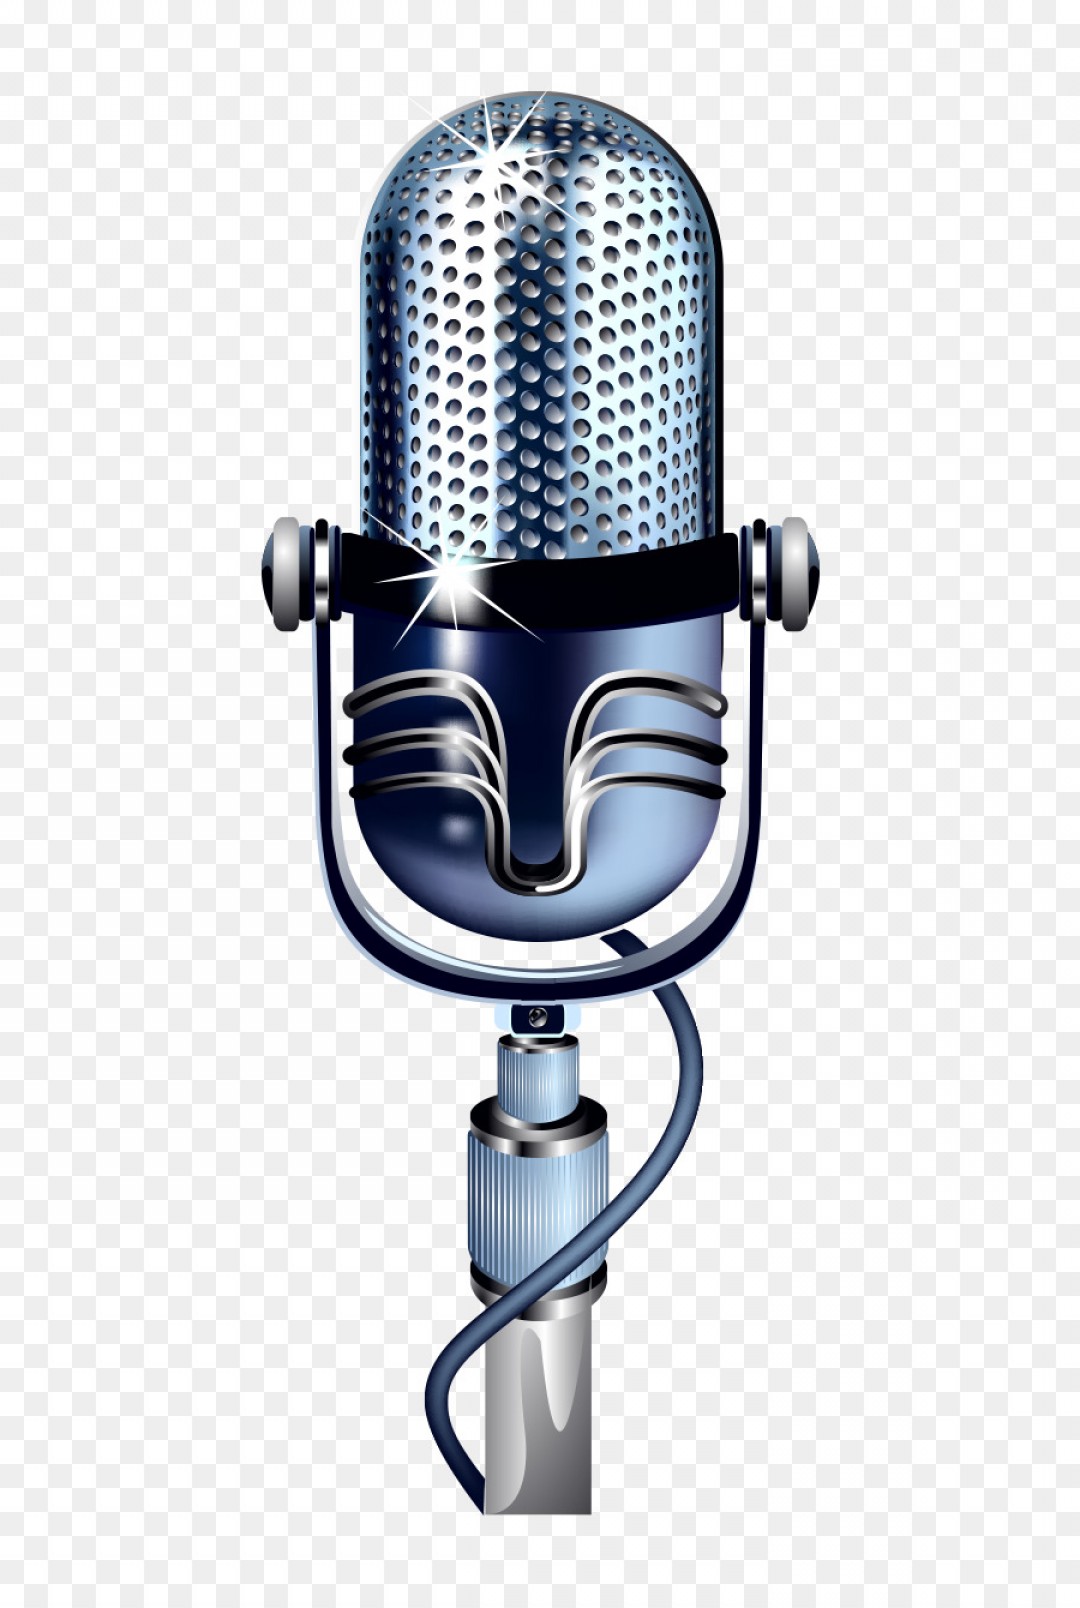 Download Microphone Vector Png at Vectorified.com | Collection of ...